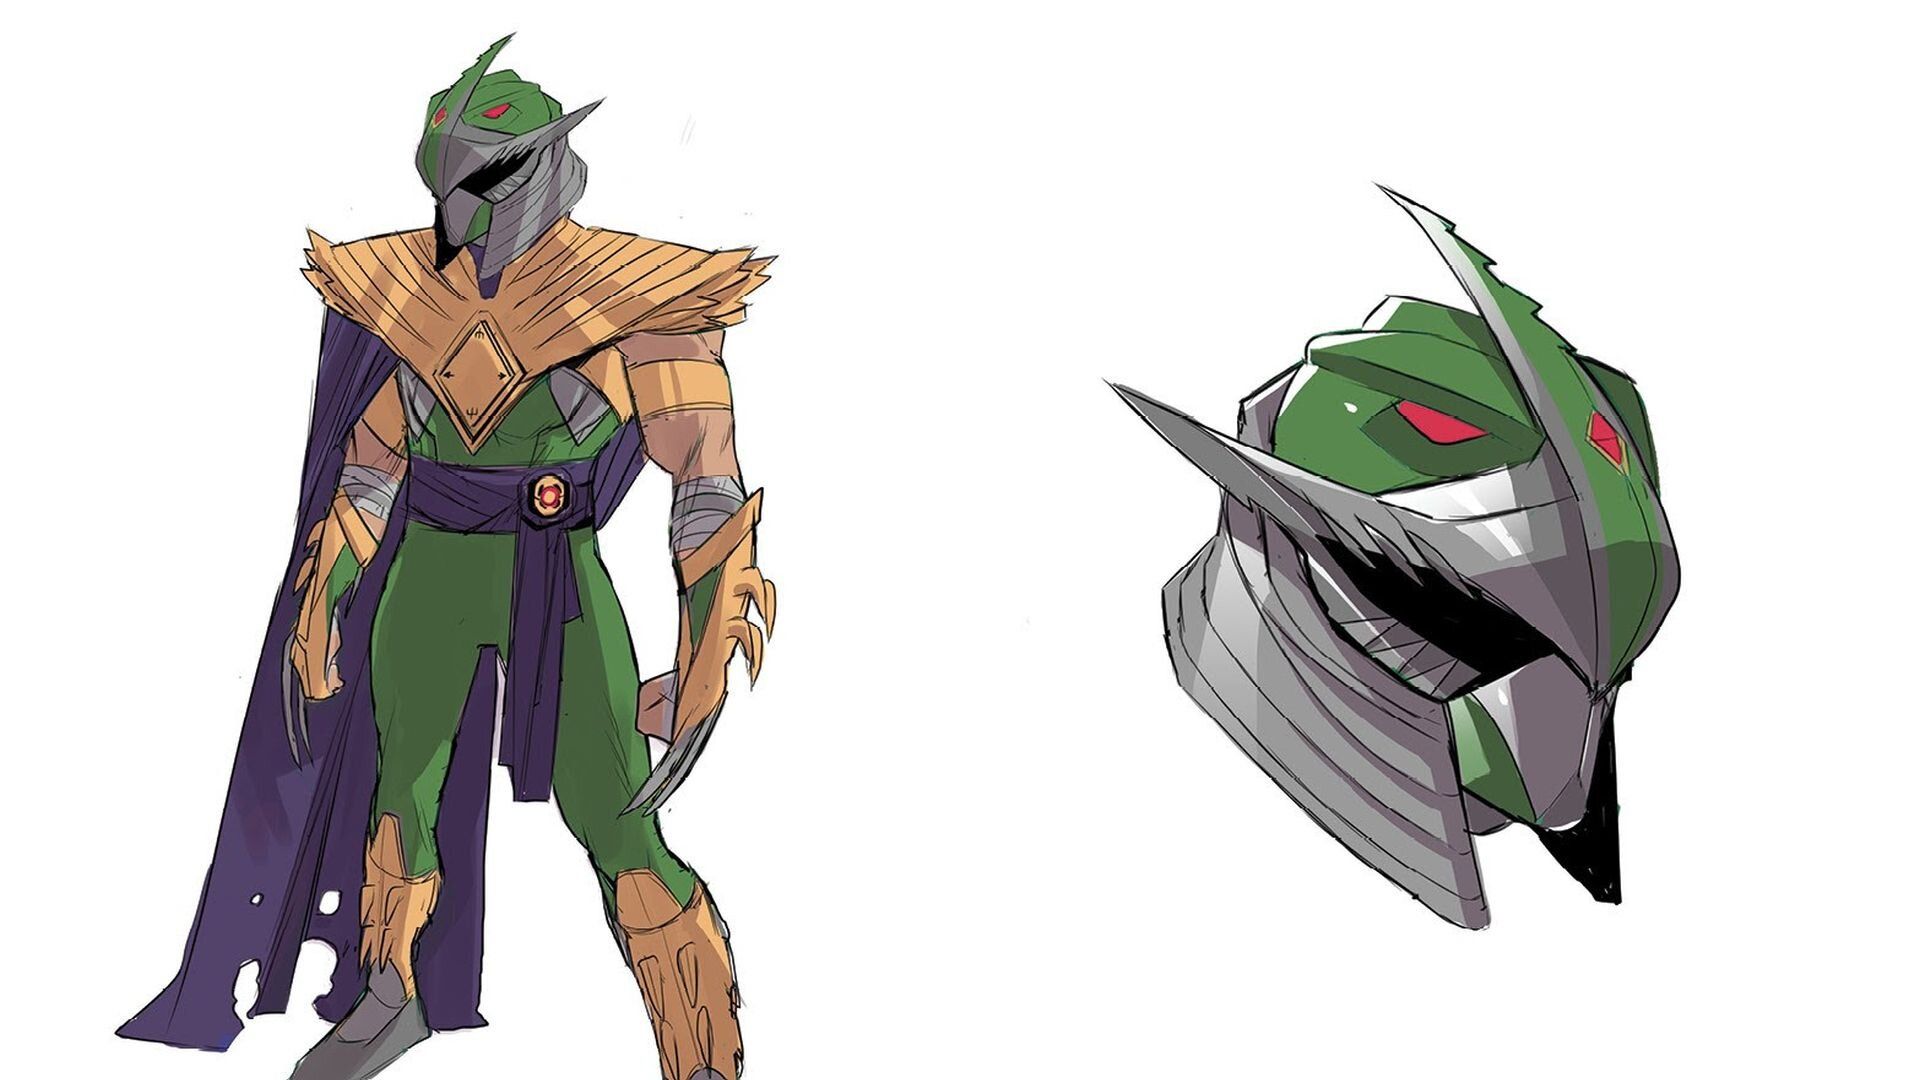 Here's a Better Look at Green Ranger Shredder from MIGHTY MORPHIN